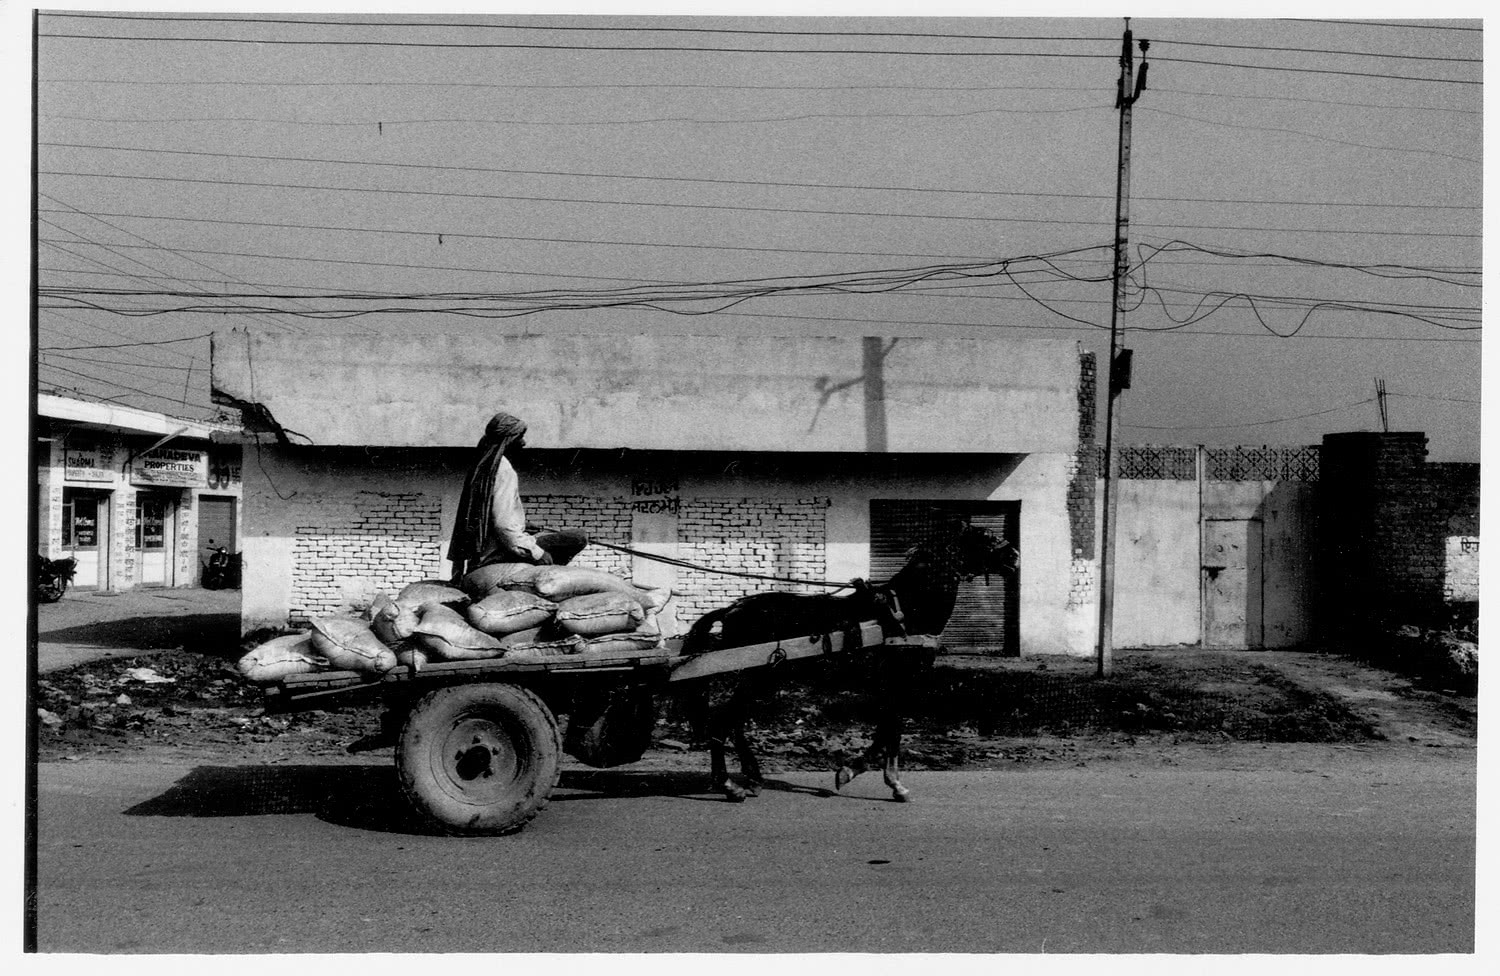 B&W Horse and cart in Punjab